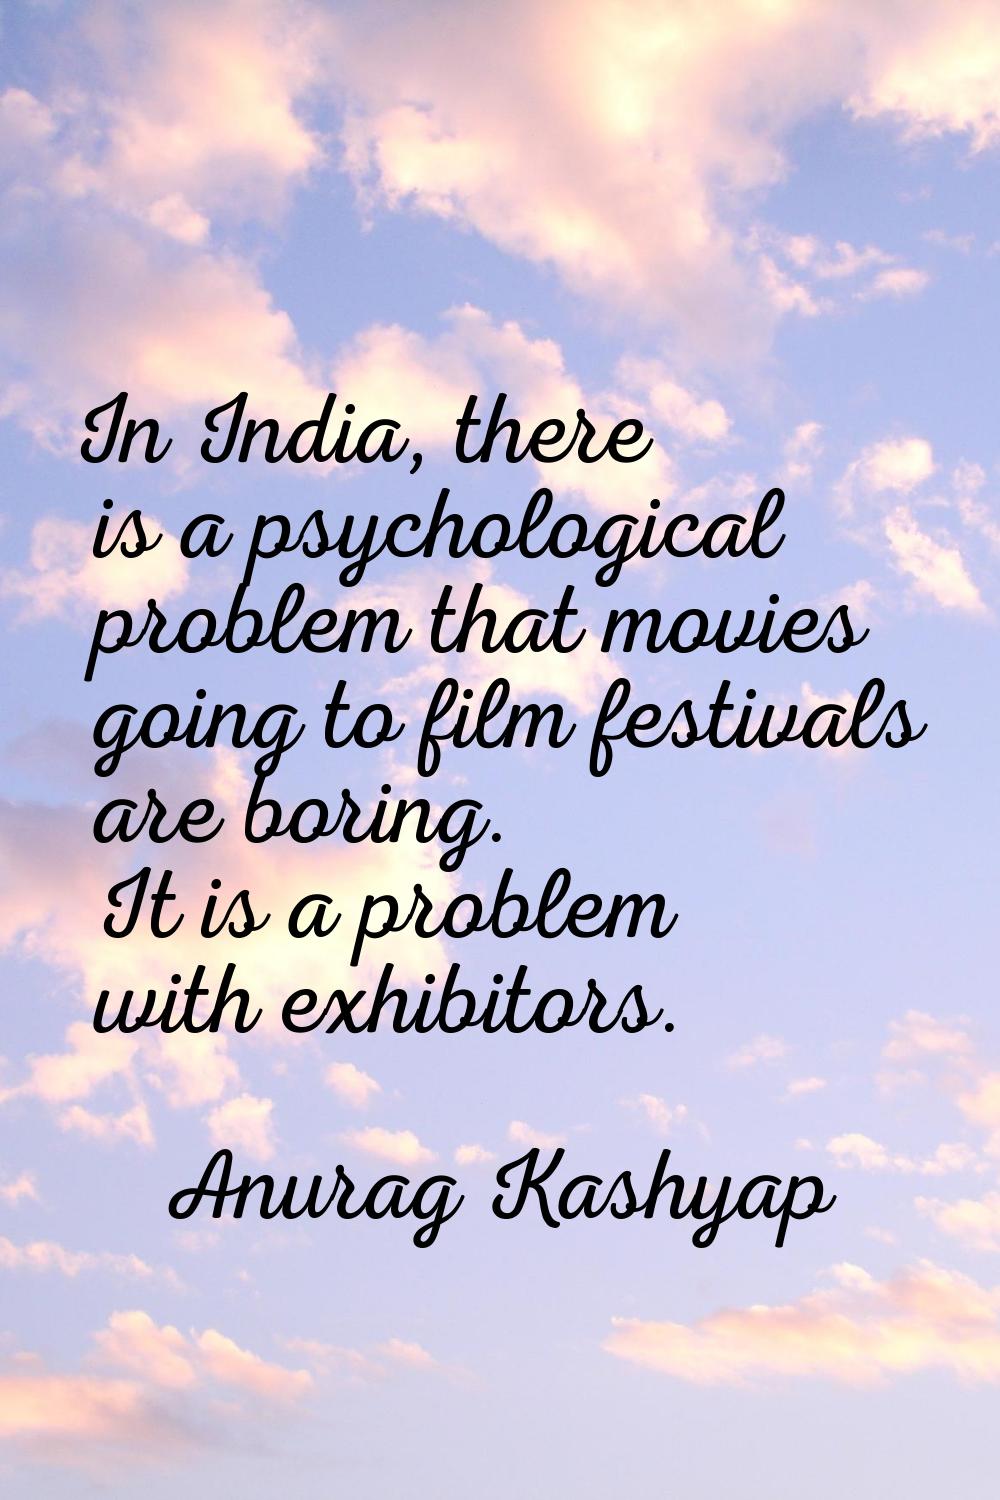 In India, there is a psychological problem that movies going to film festivals are boring. It is a 